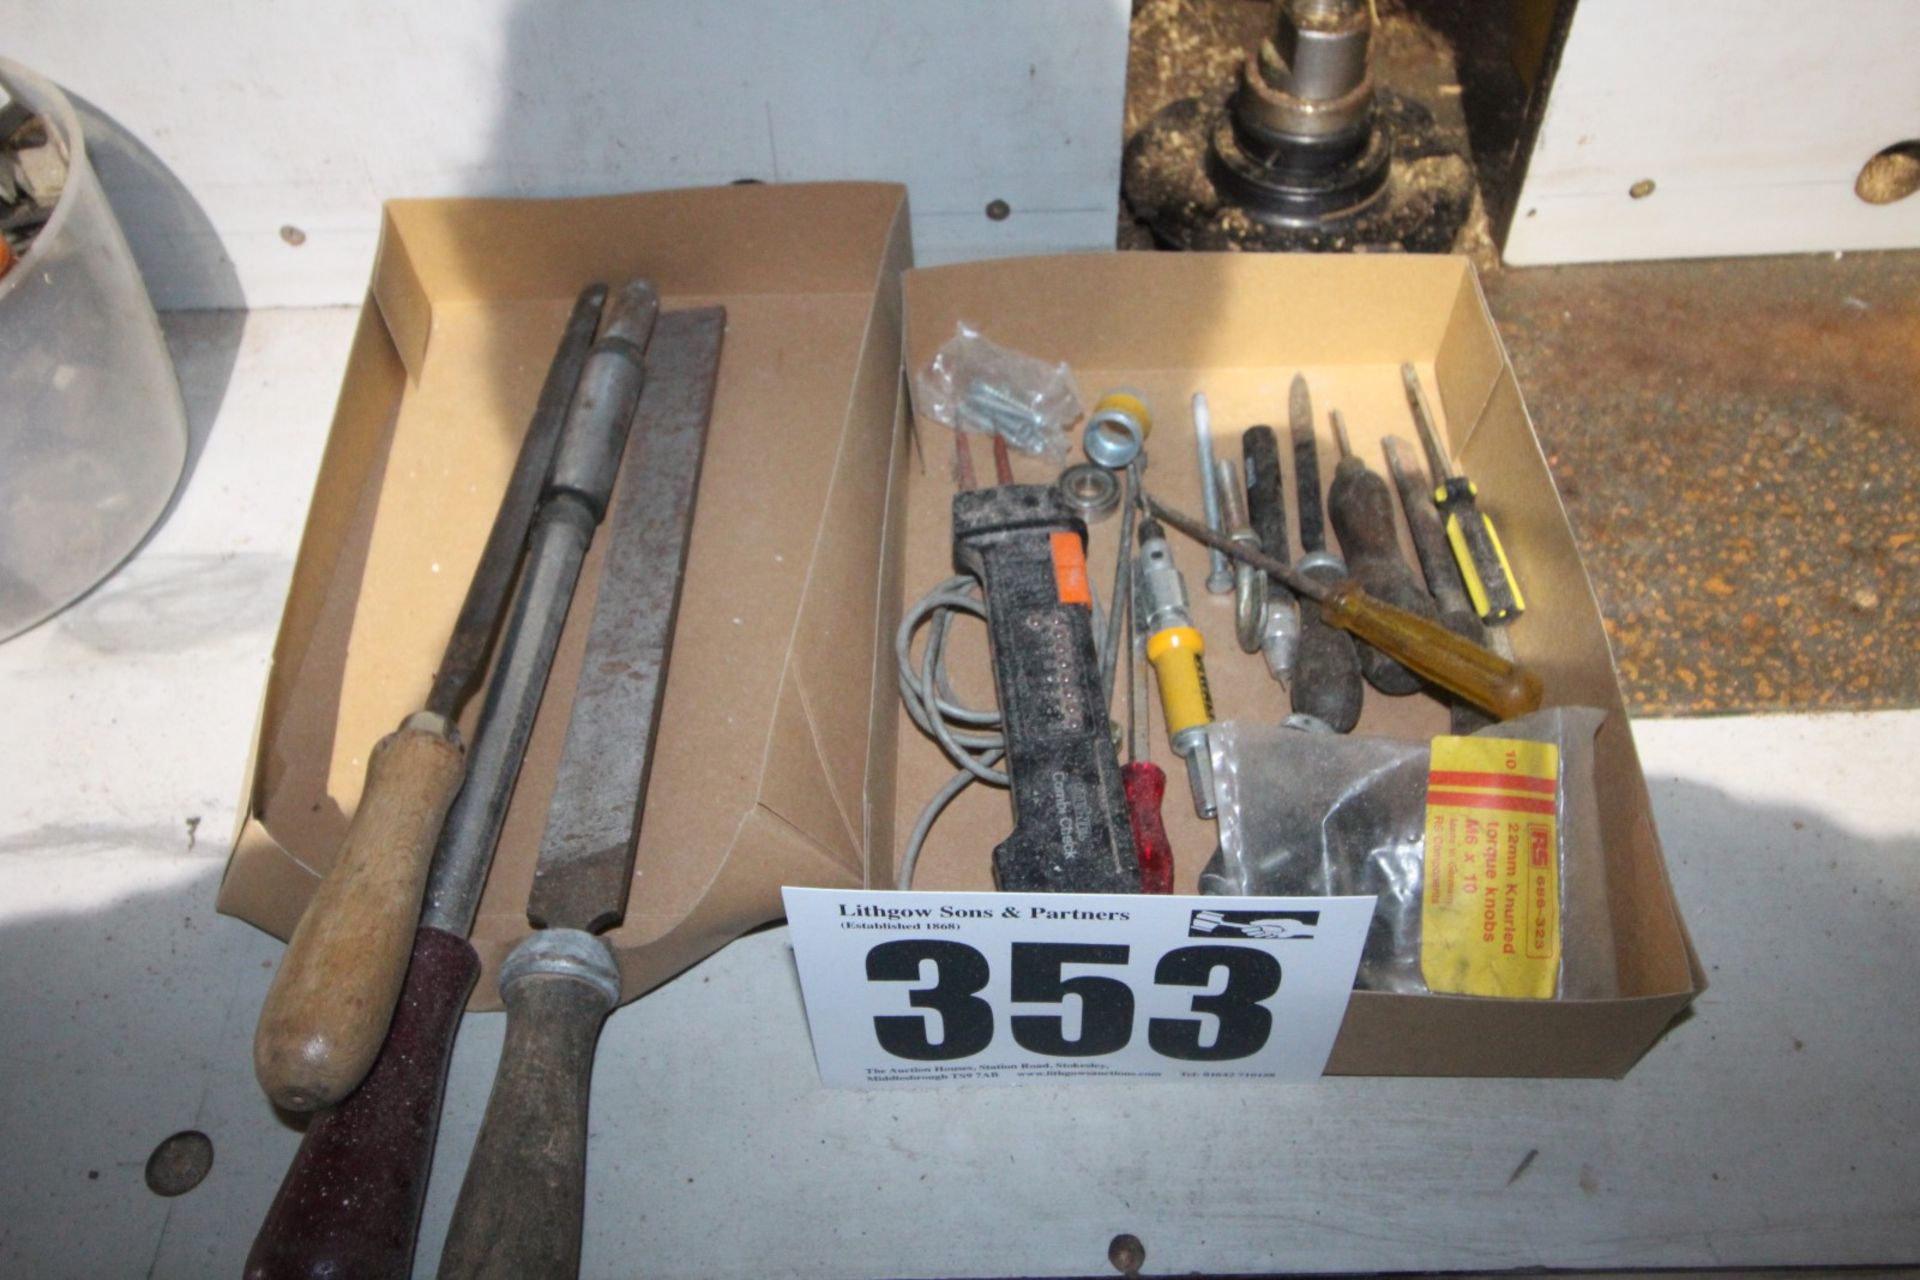 2x BOXES AND CONTENTS OF FILES, YANKEE SCREWDRIVER, SMALL SCREWDRIVERS